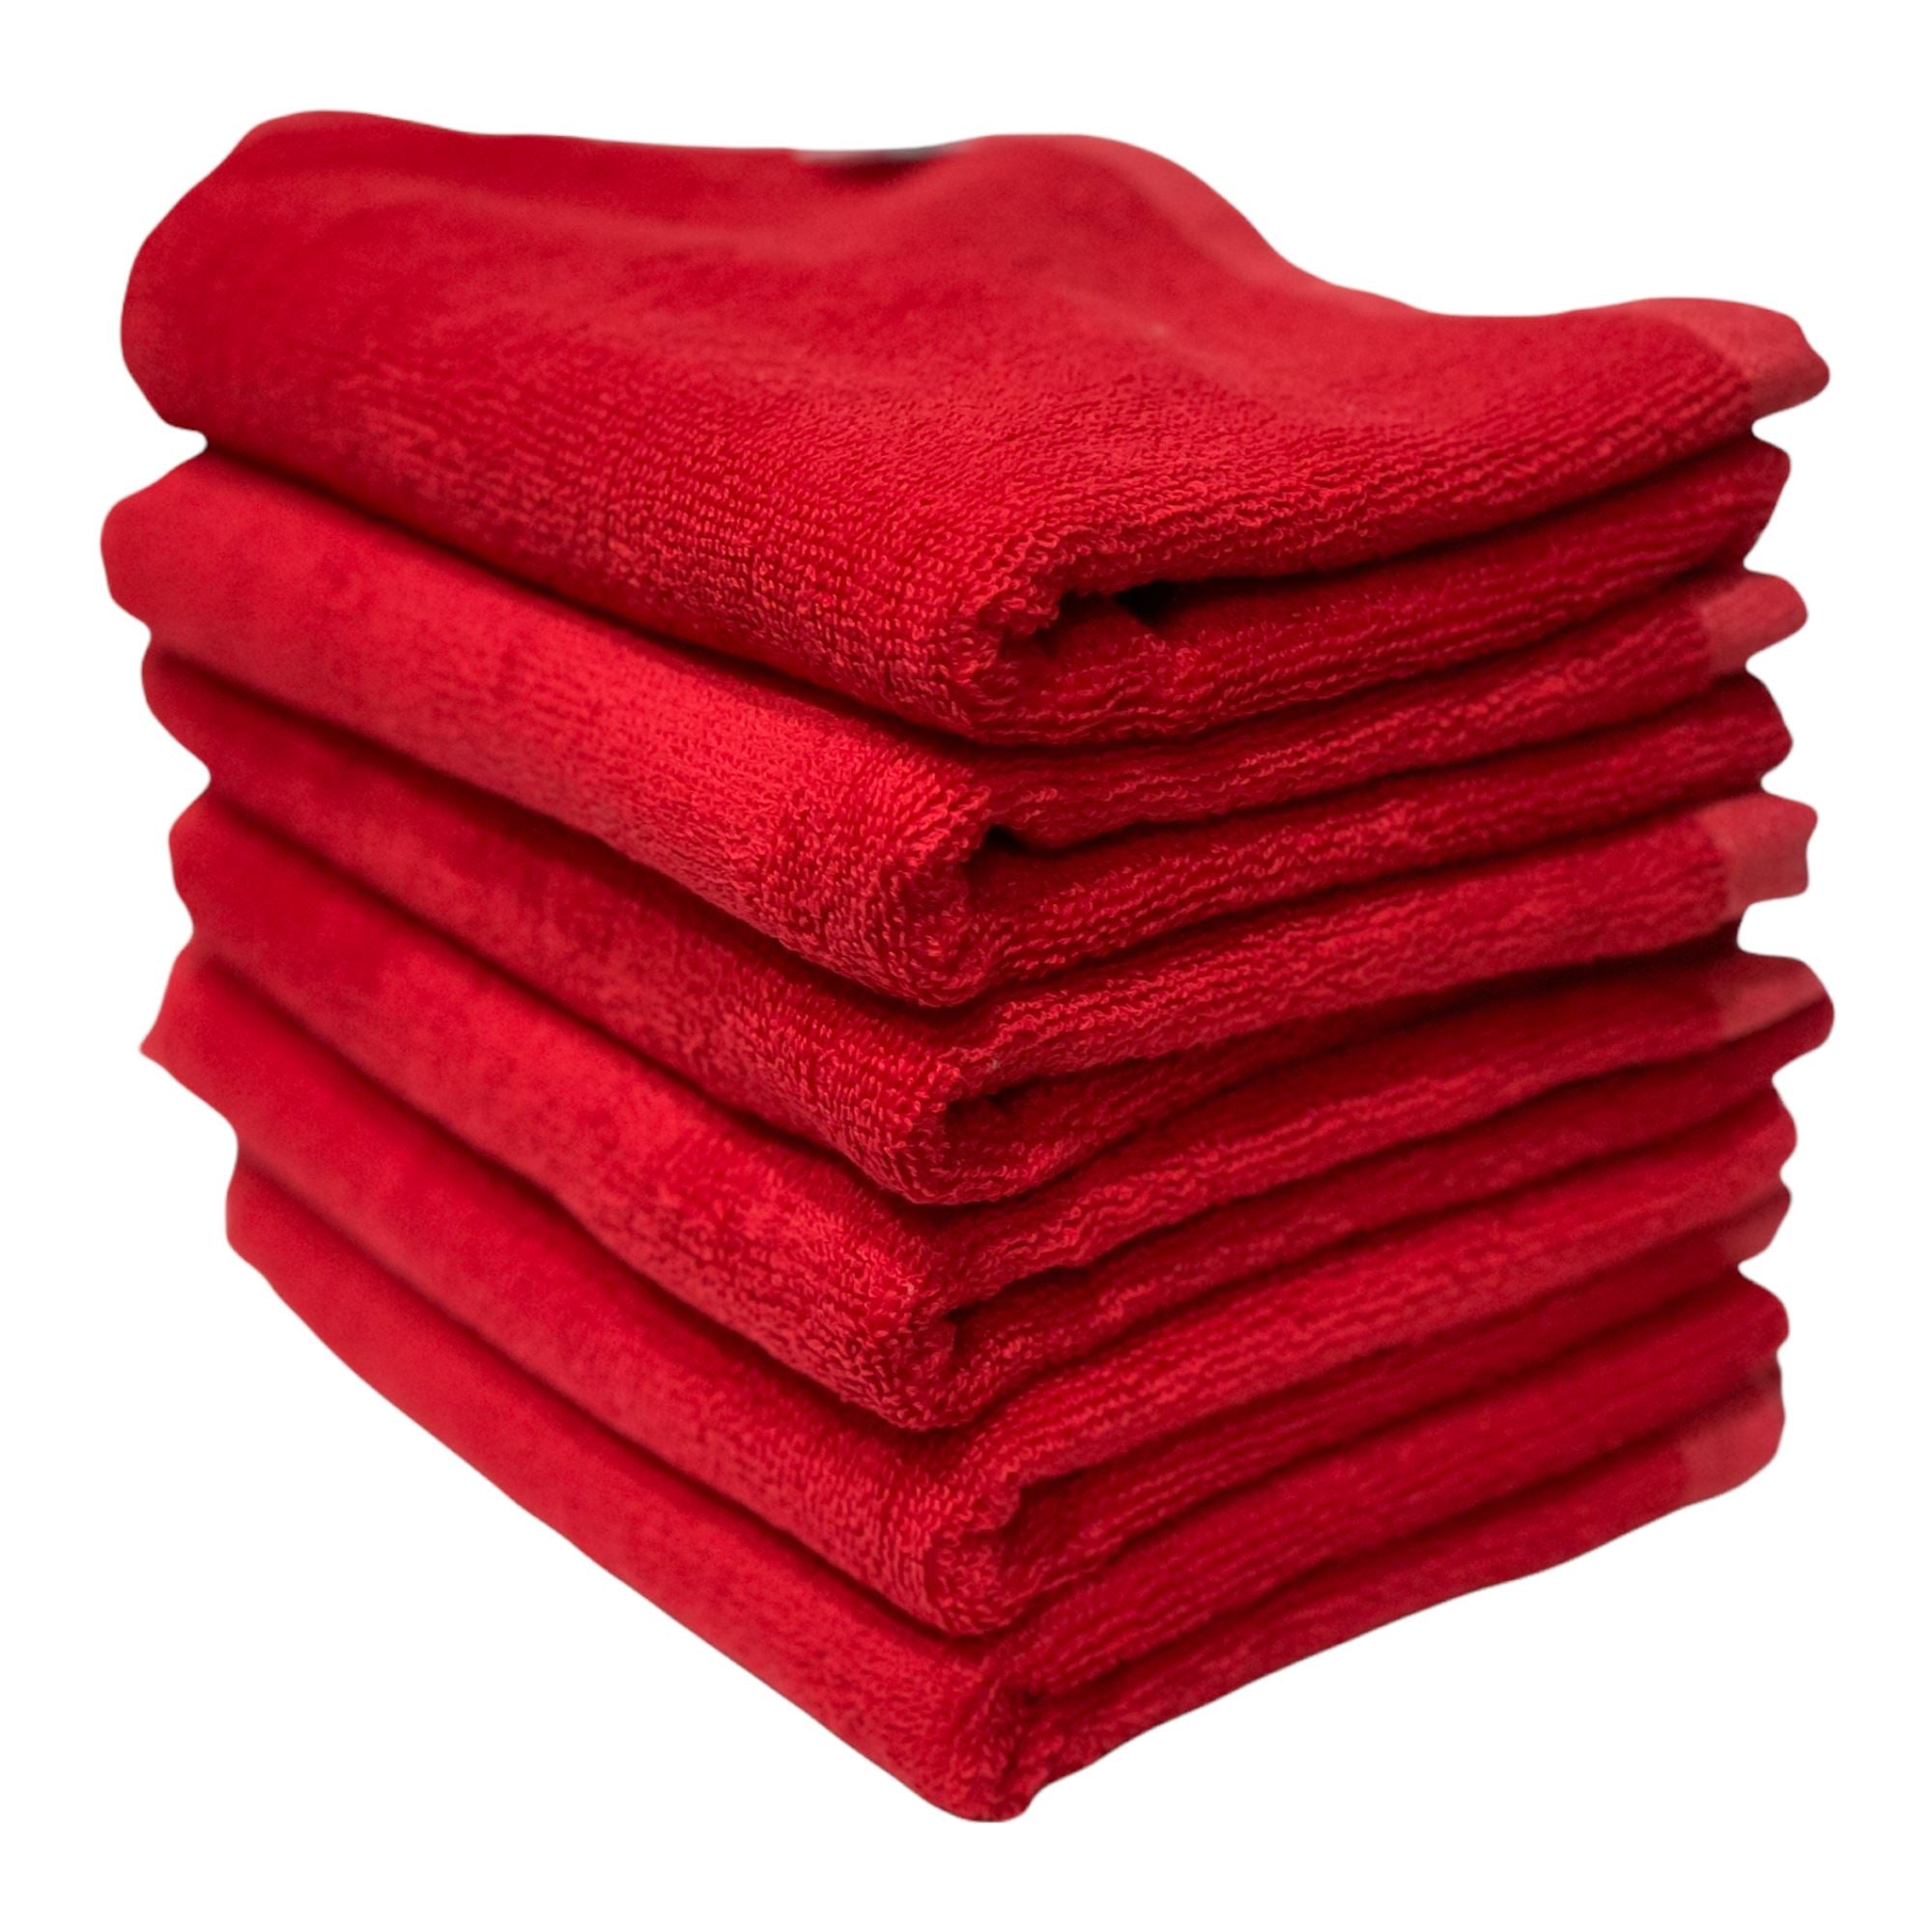 https://cdn.shopify.com/s/files/1/0561/1693/6911/products/car-wash-100-cotton-terry-cloth-cleaning-drying-towels-16-x-25-cotton-towel-golden-state-trading-inc-12-pieces-red-465747.jpg?v=1668741200